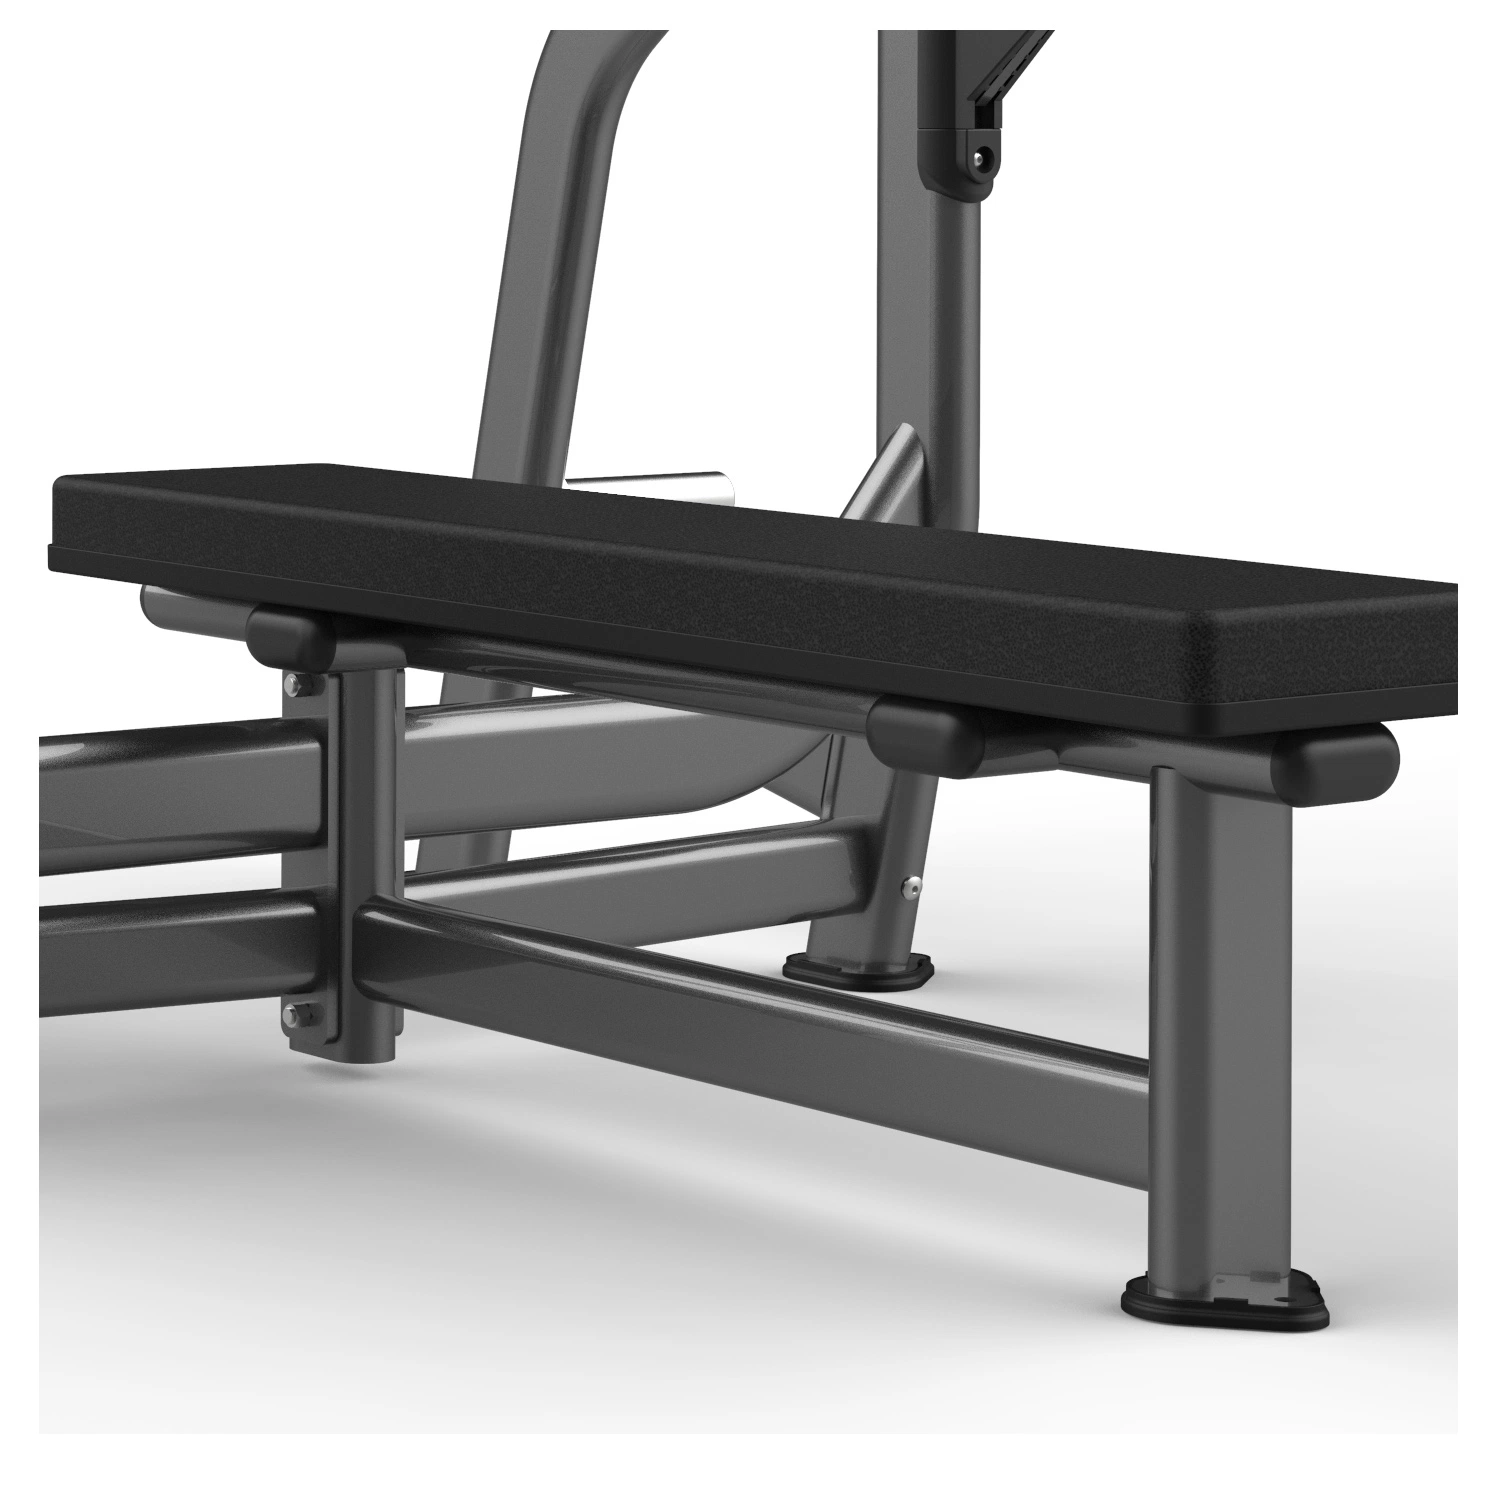 Commercial Fitness Body Fit Exercise Equipment for Flat Bench (FW-1001)